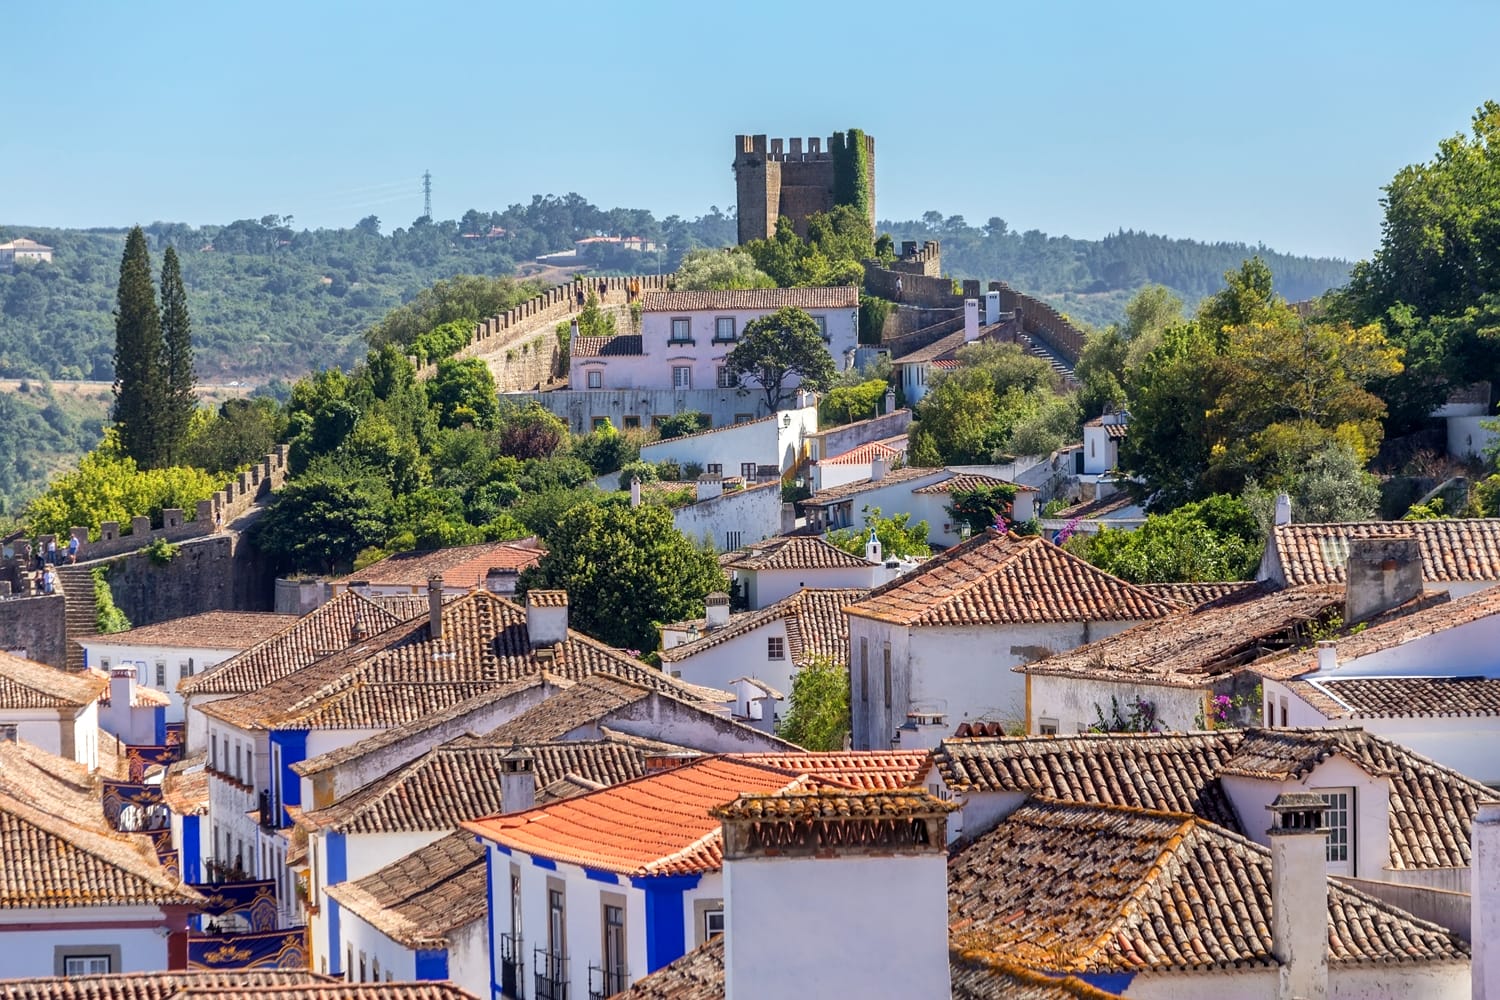 The ancient streets and houses of Portuguese village of Obidos.